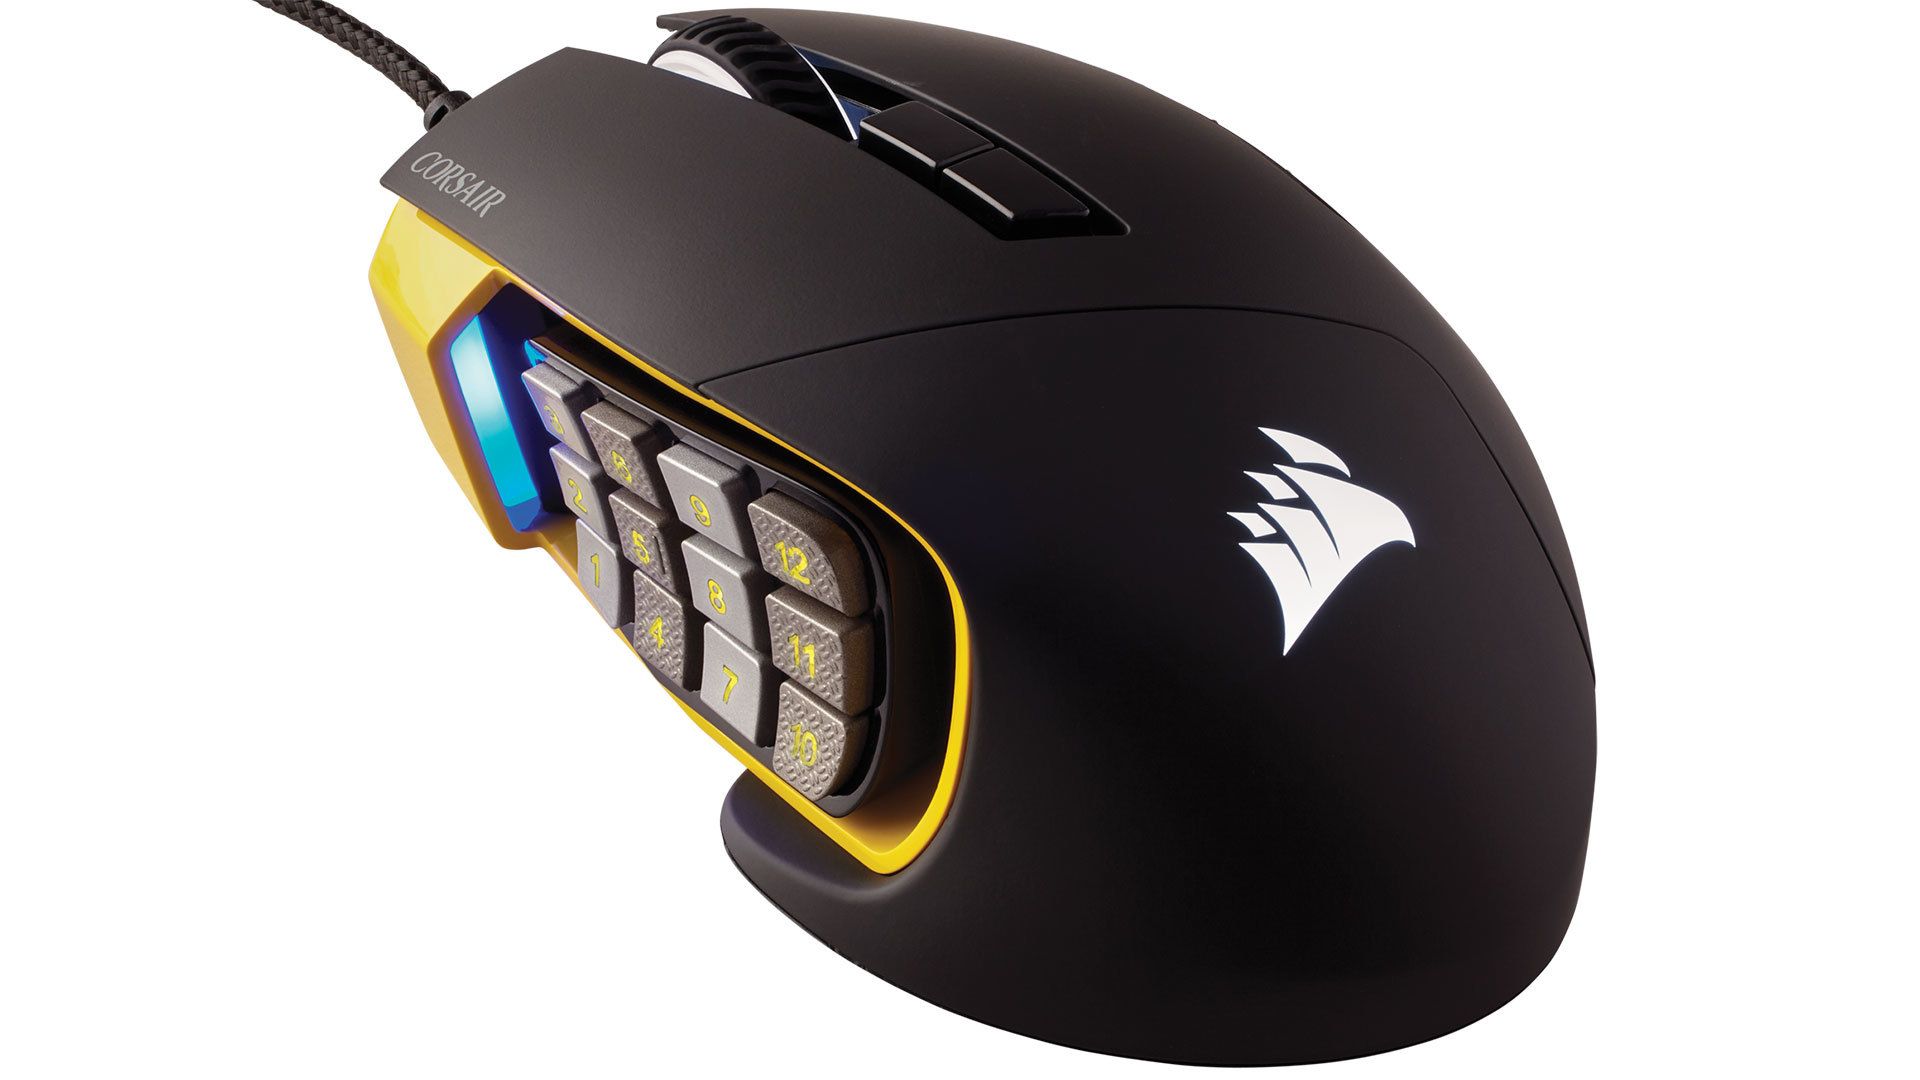 How To Change Buttons On The Scimitar Pro RGB Gaming Mouse